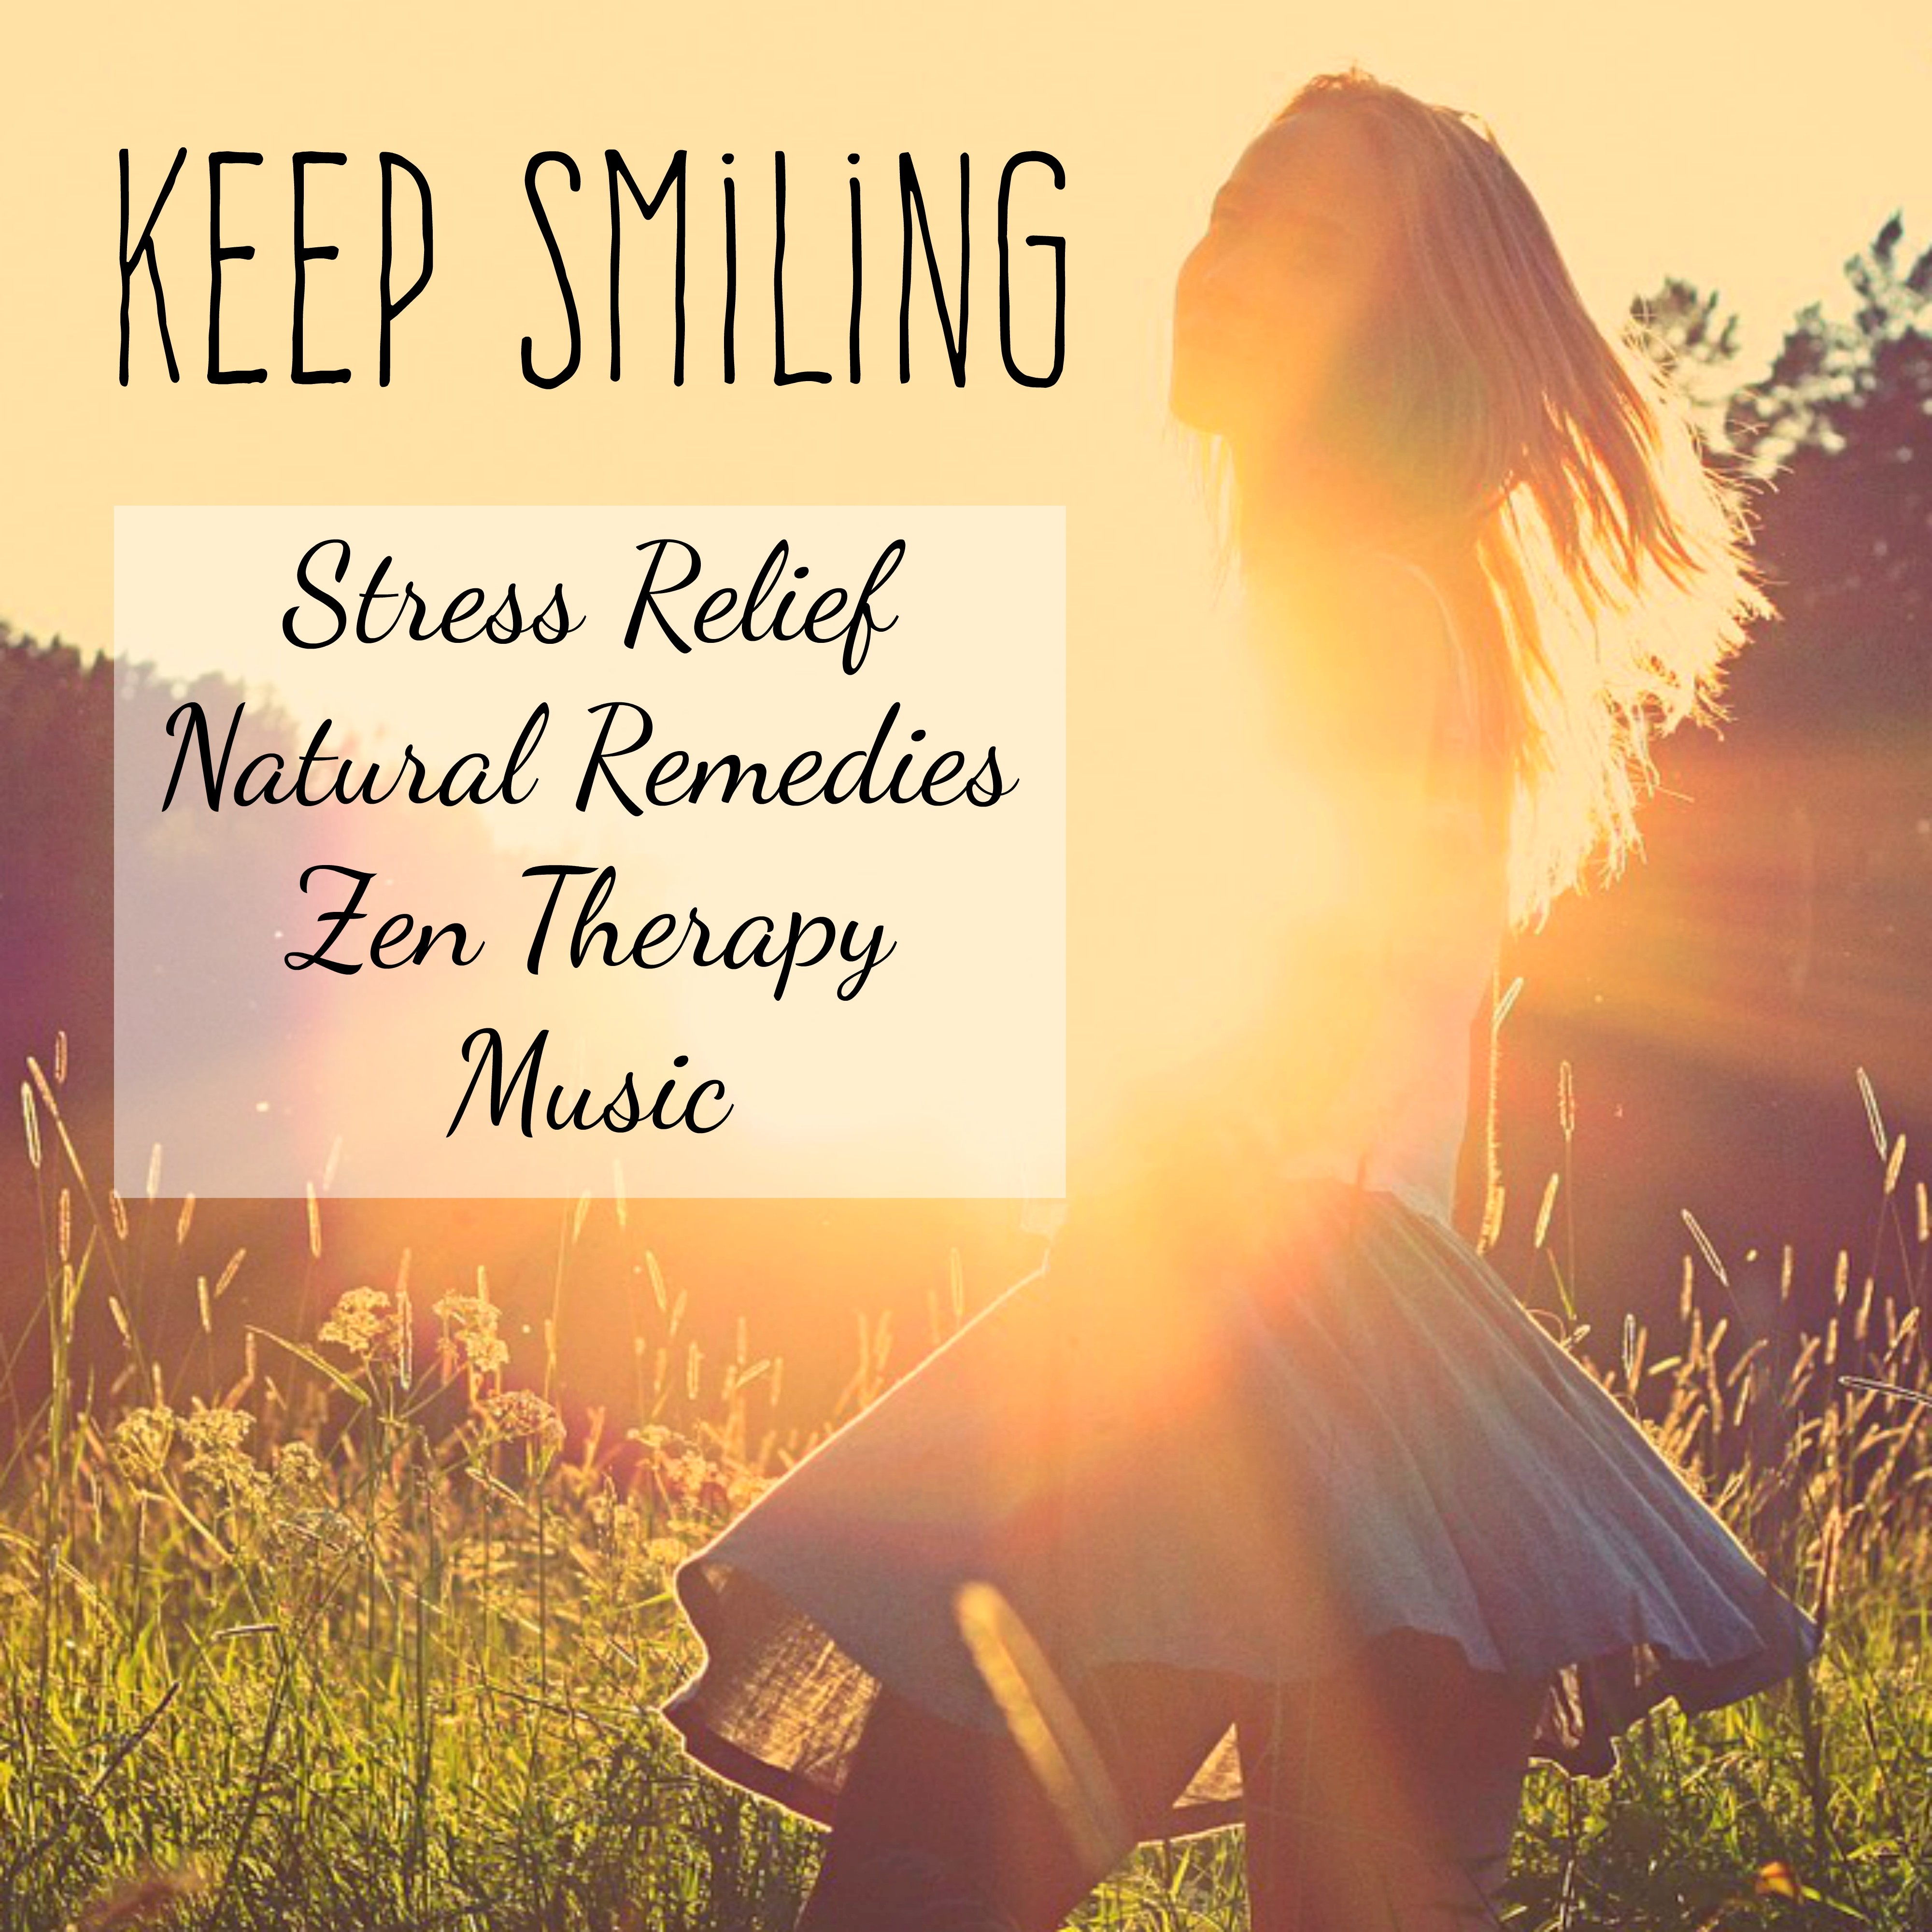 Keep Smiling - Stress Relief Natural Remedies Zen Therapy Music with New Age Instrumental Spiritual Sounds